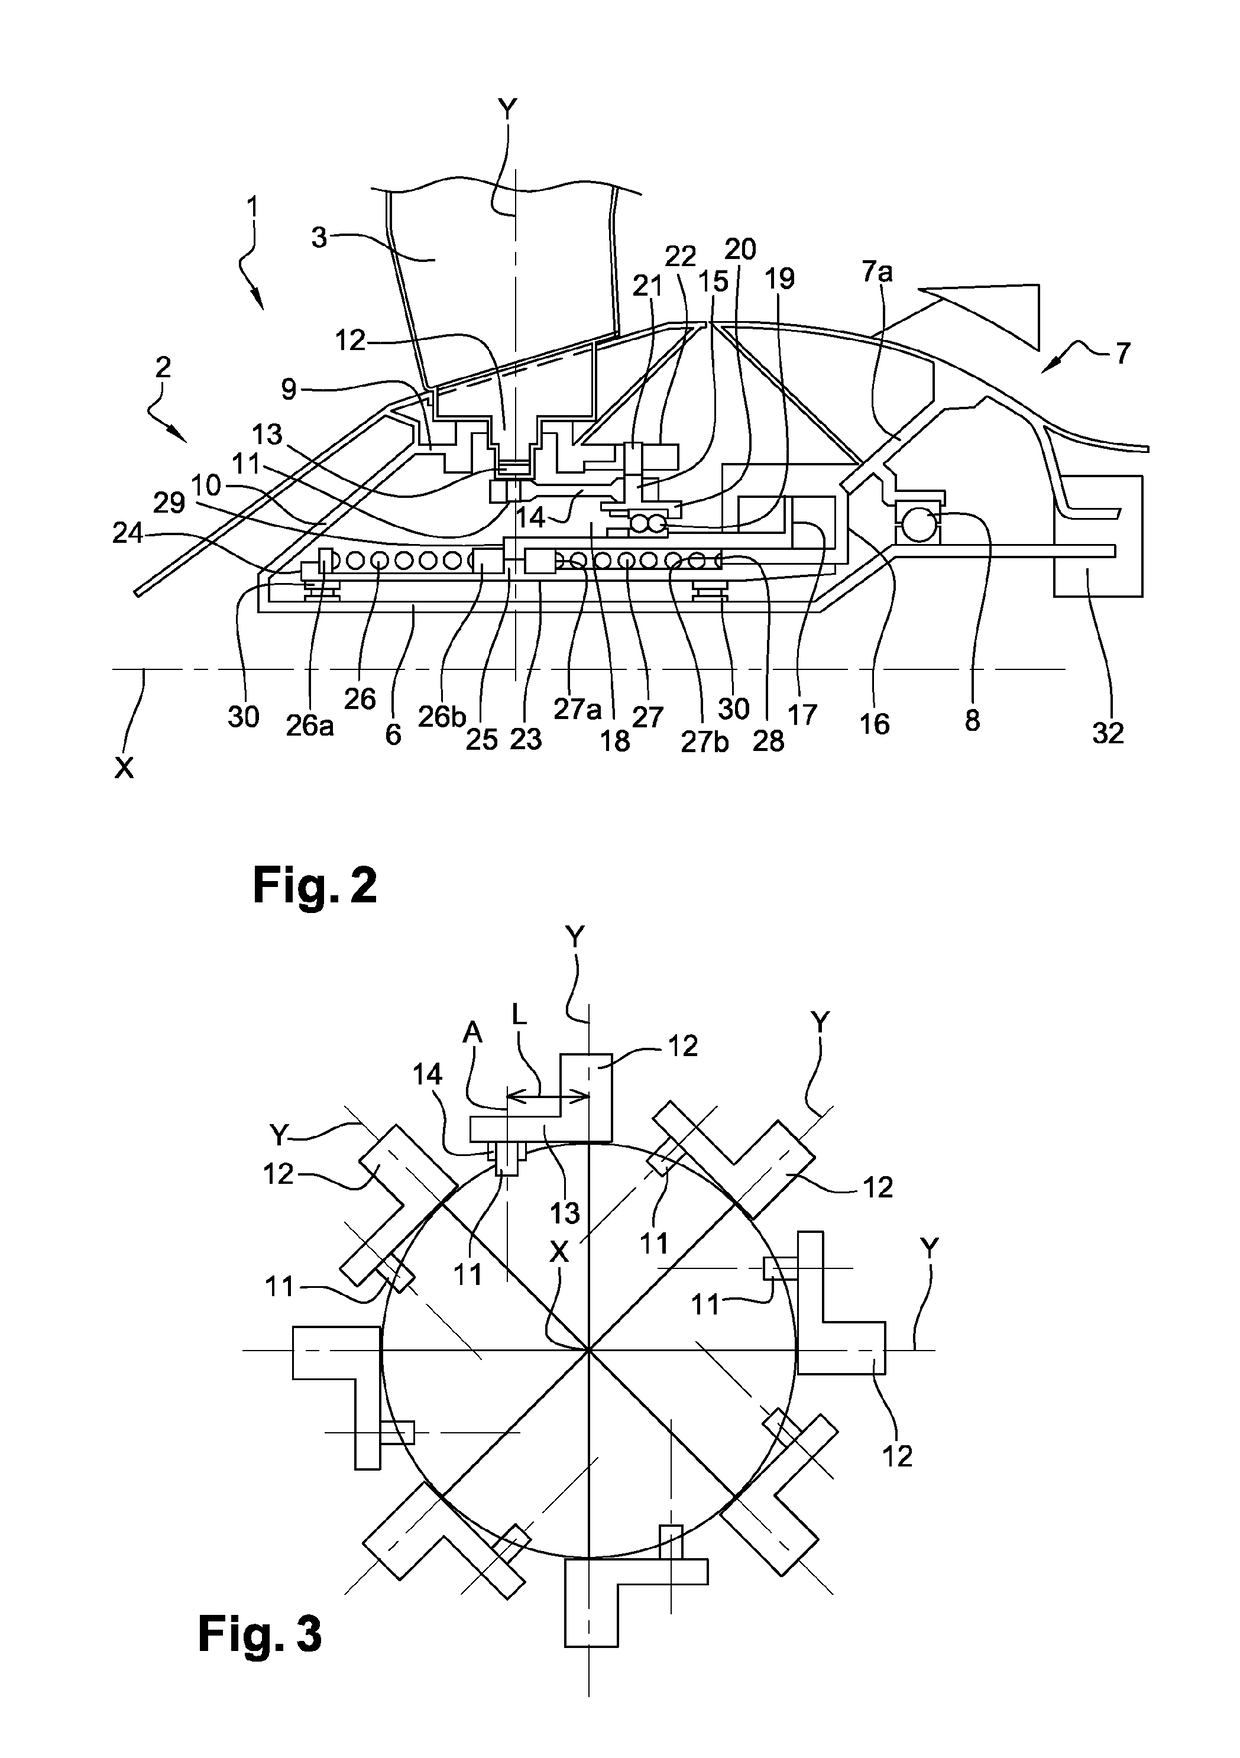 Fan module with variable-pitch blades for a turbine engine